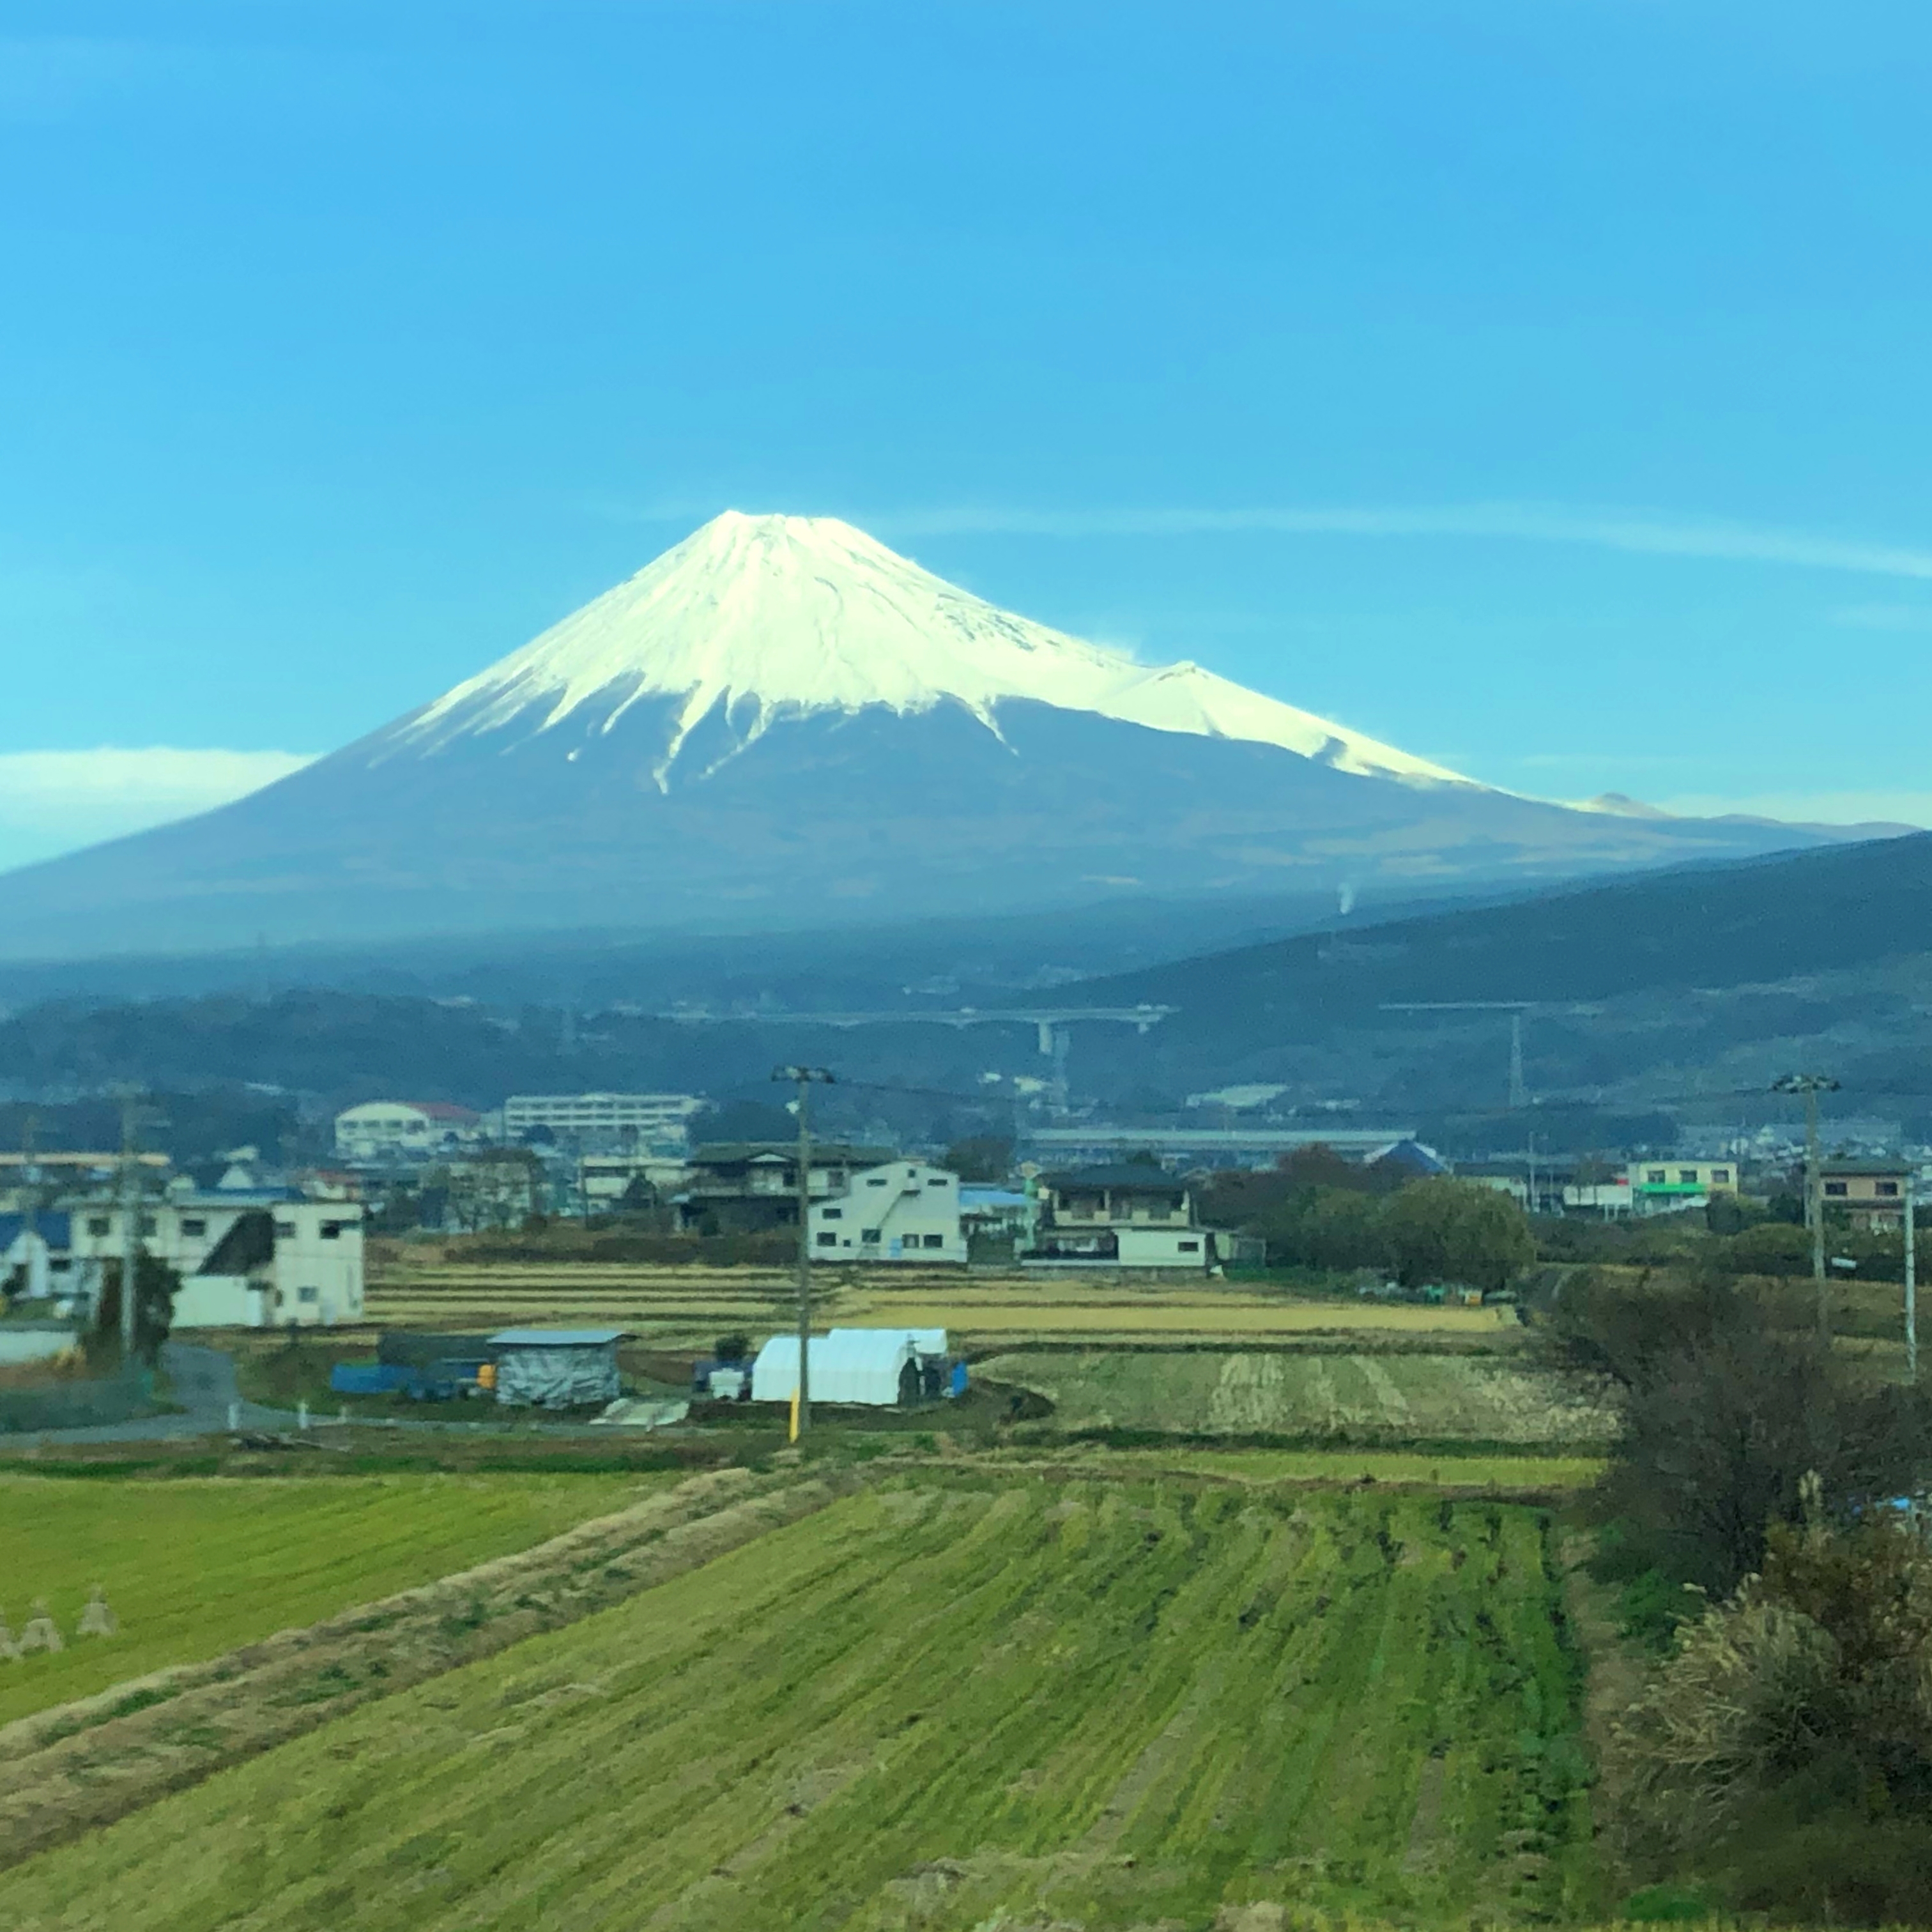 Mount Fuji with white, snow-covered top centered